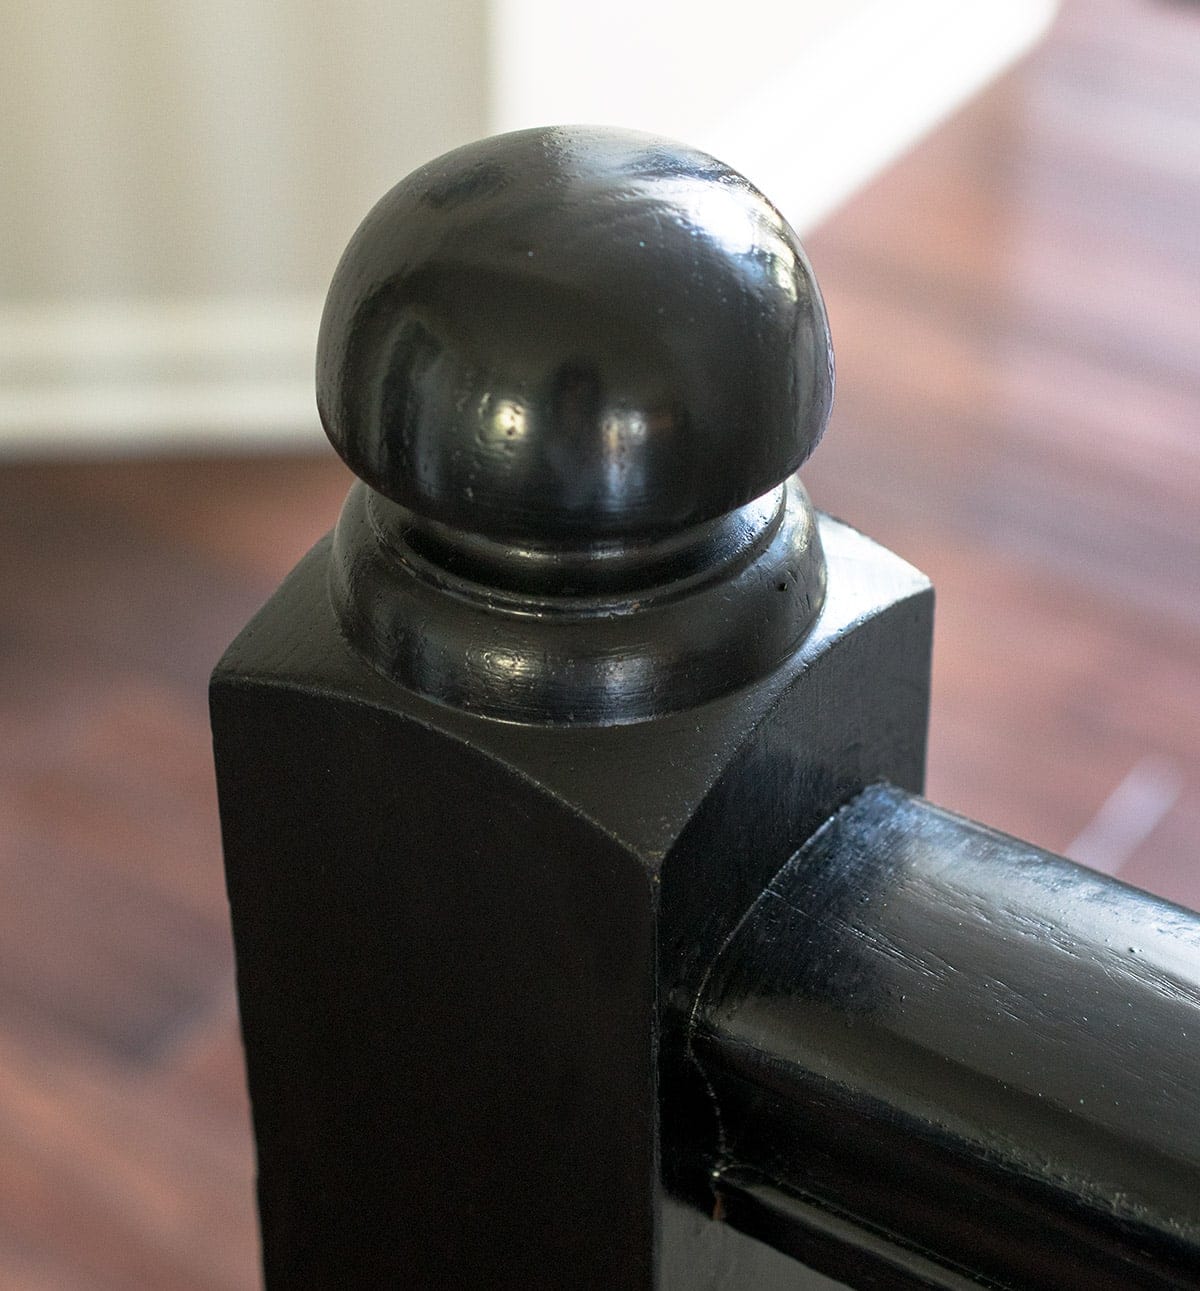 Staircase baluster painted using Benjamin Moore Advance Paint in Satin Black.